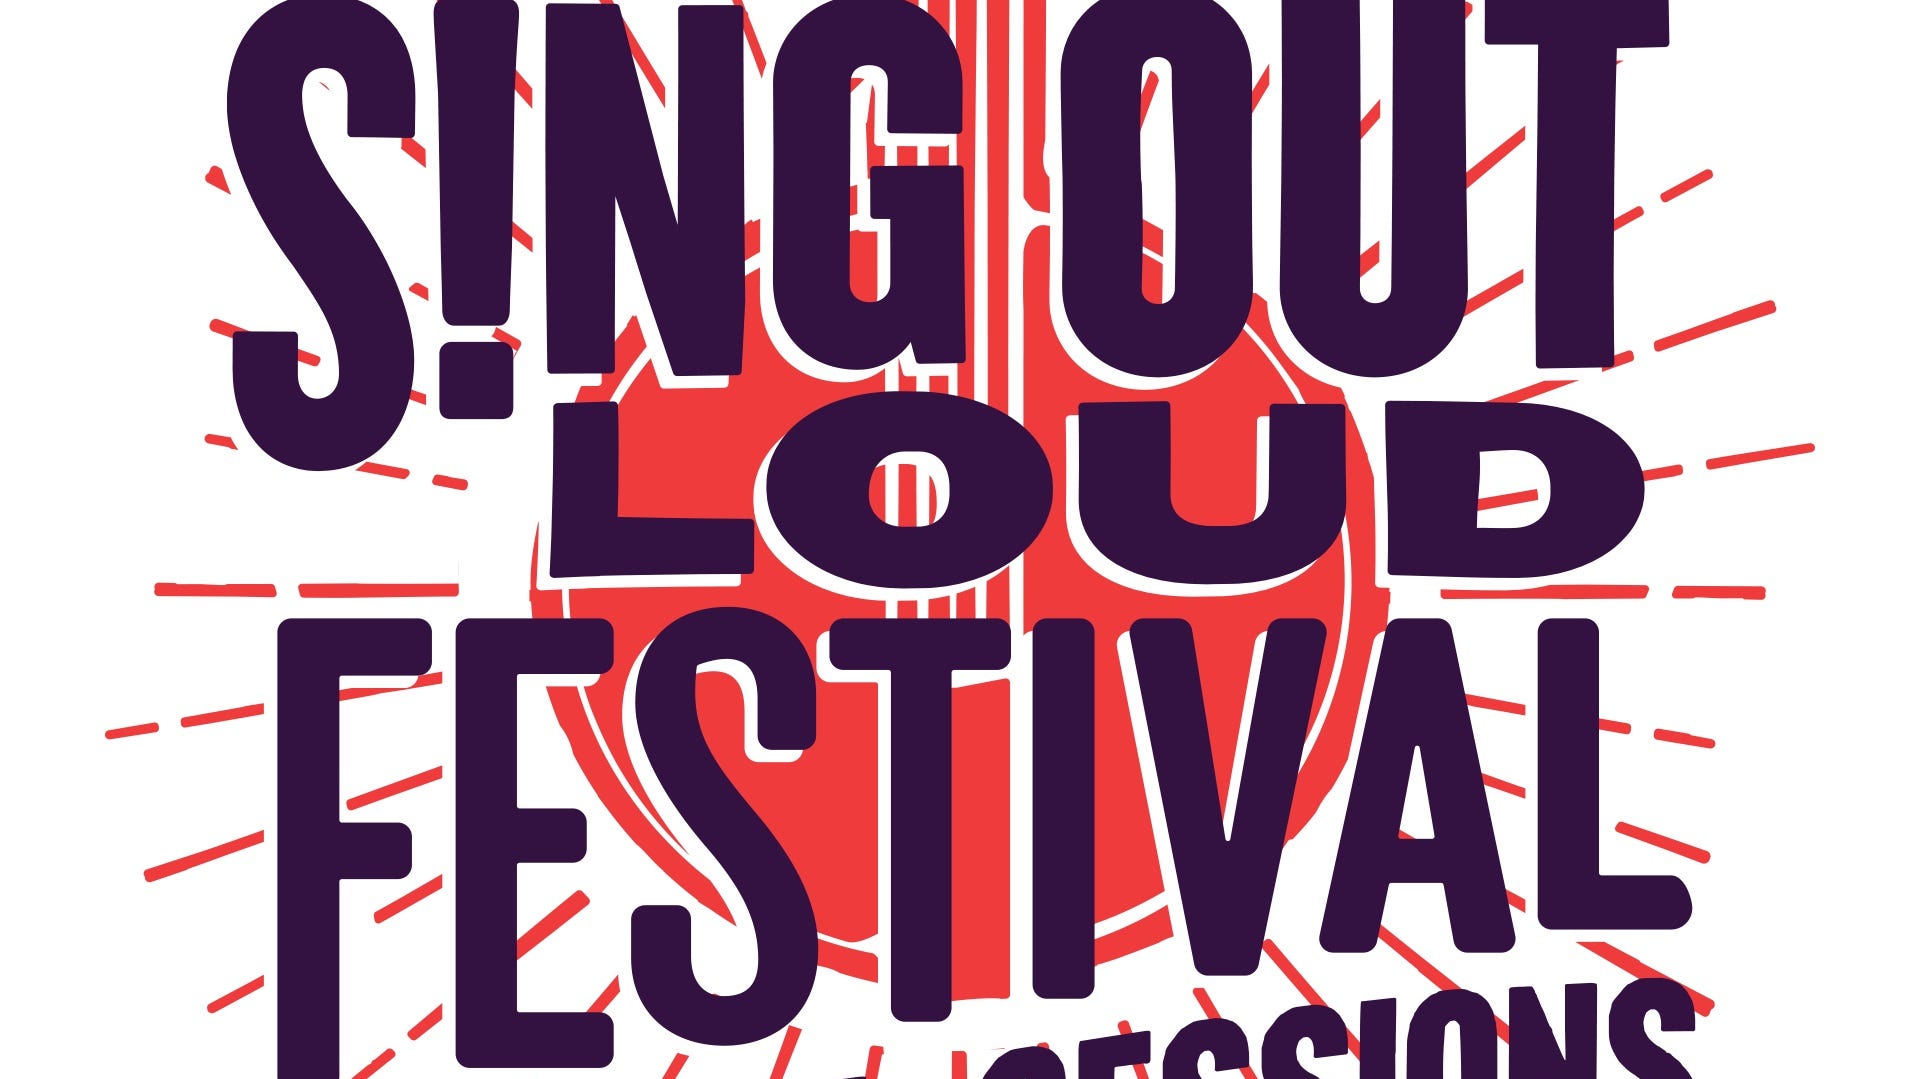 The Sing Out Loud Festival is held virtually due to the coronavirus